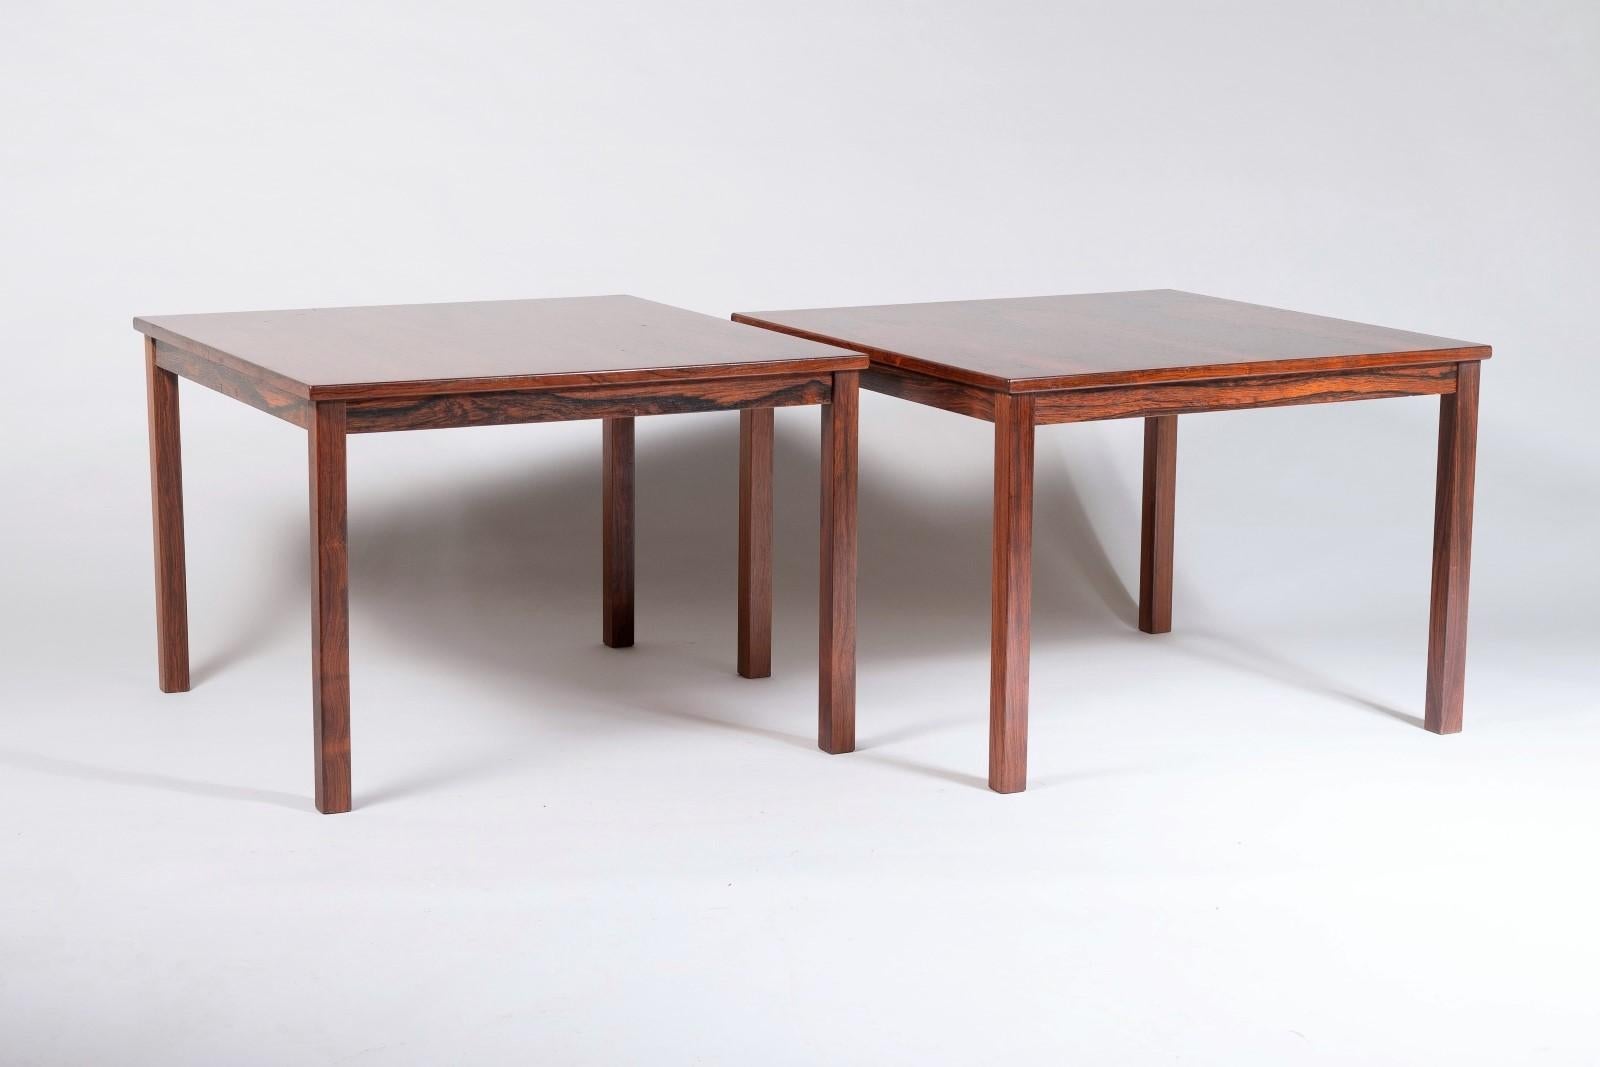 An attractive pair of mid-century Danish coffee tables in rosewood, the tables are matching in size with lovely modern form, square and a good size at 70cm x 70cm, so slightly larger than the usual 60cm which makes these pair very appealing to those